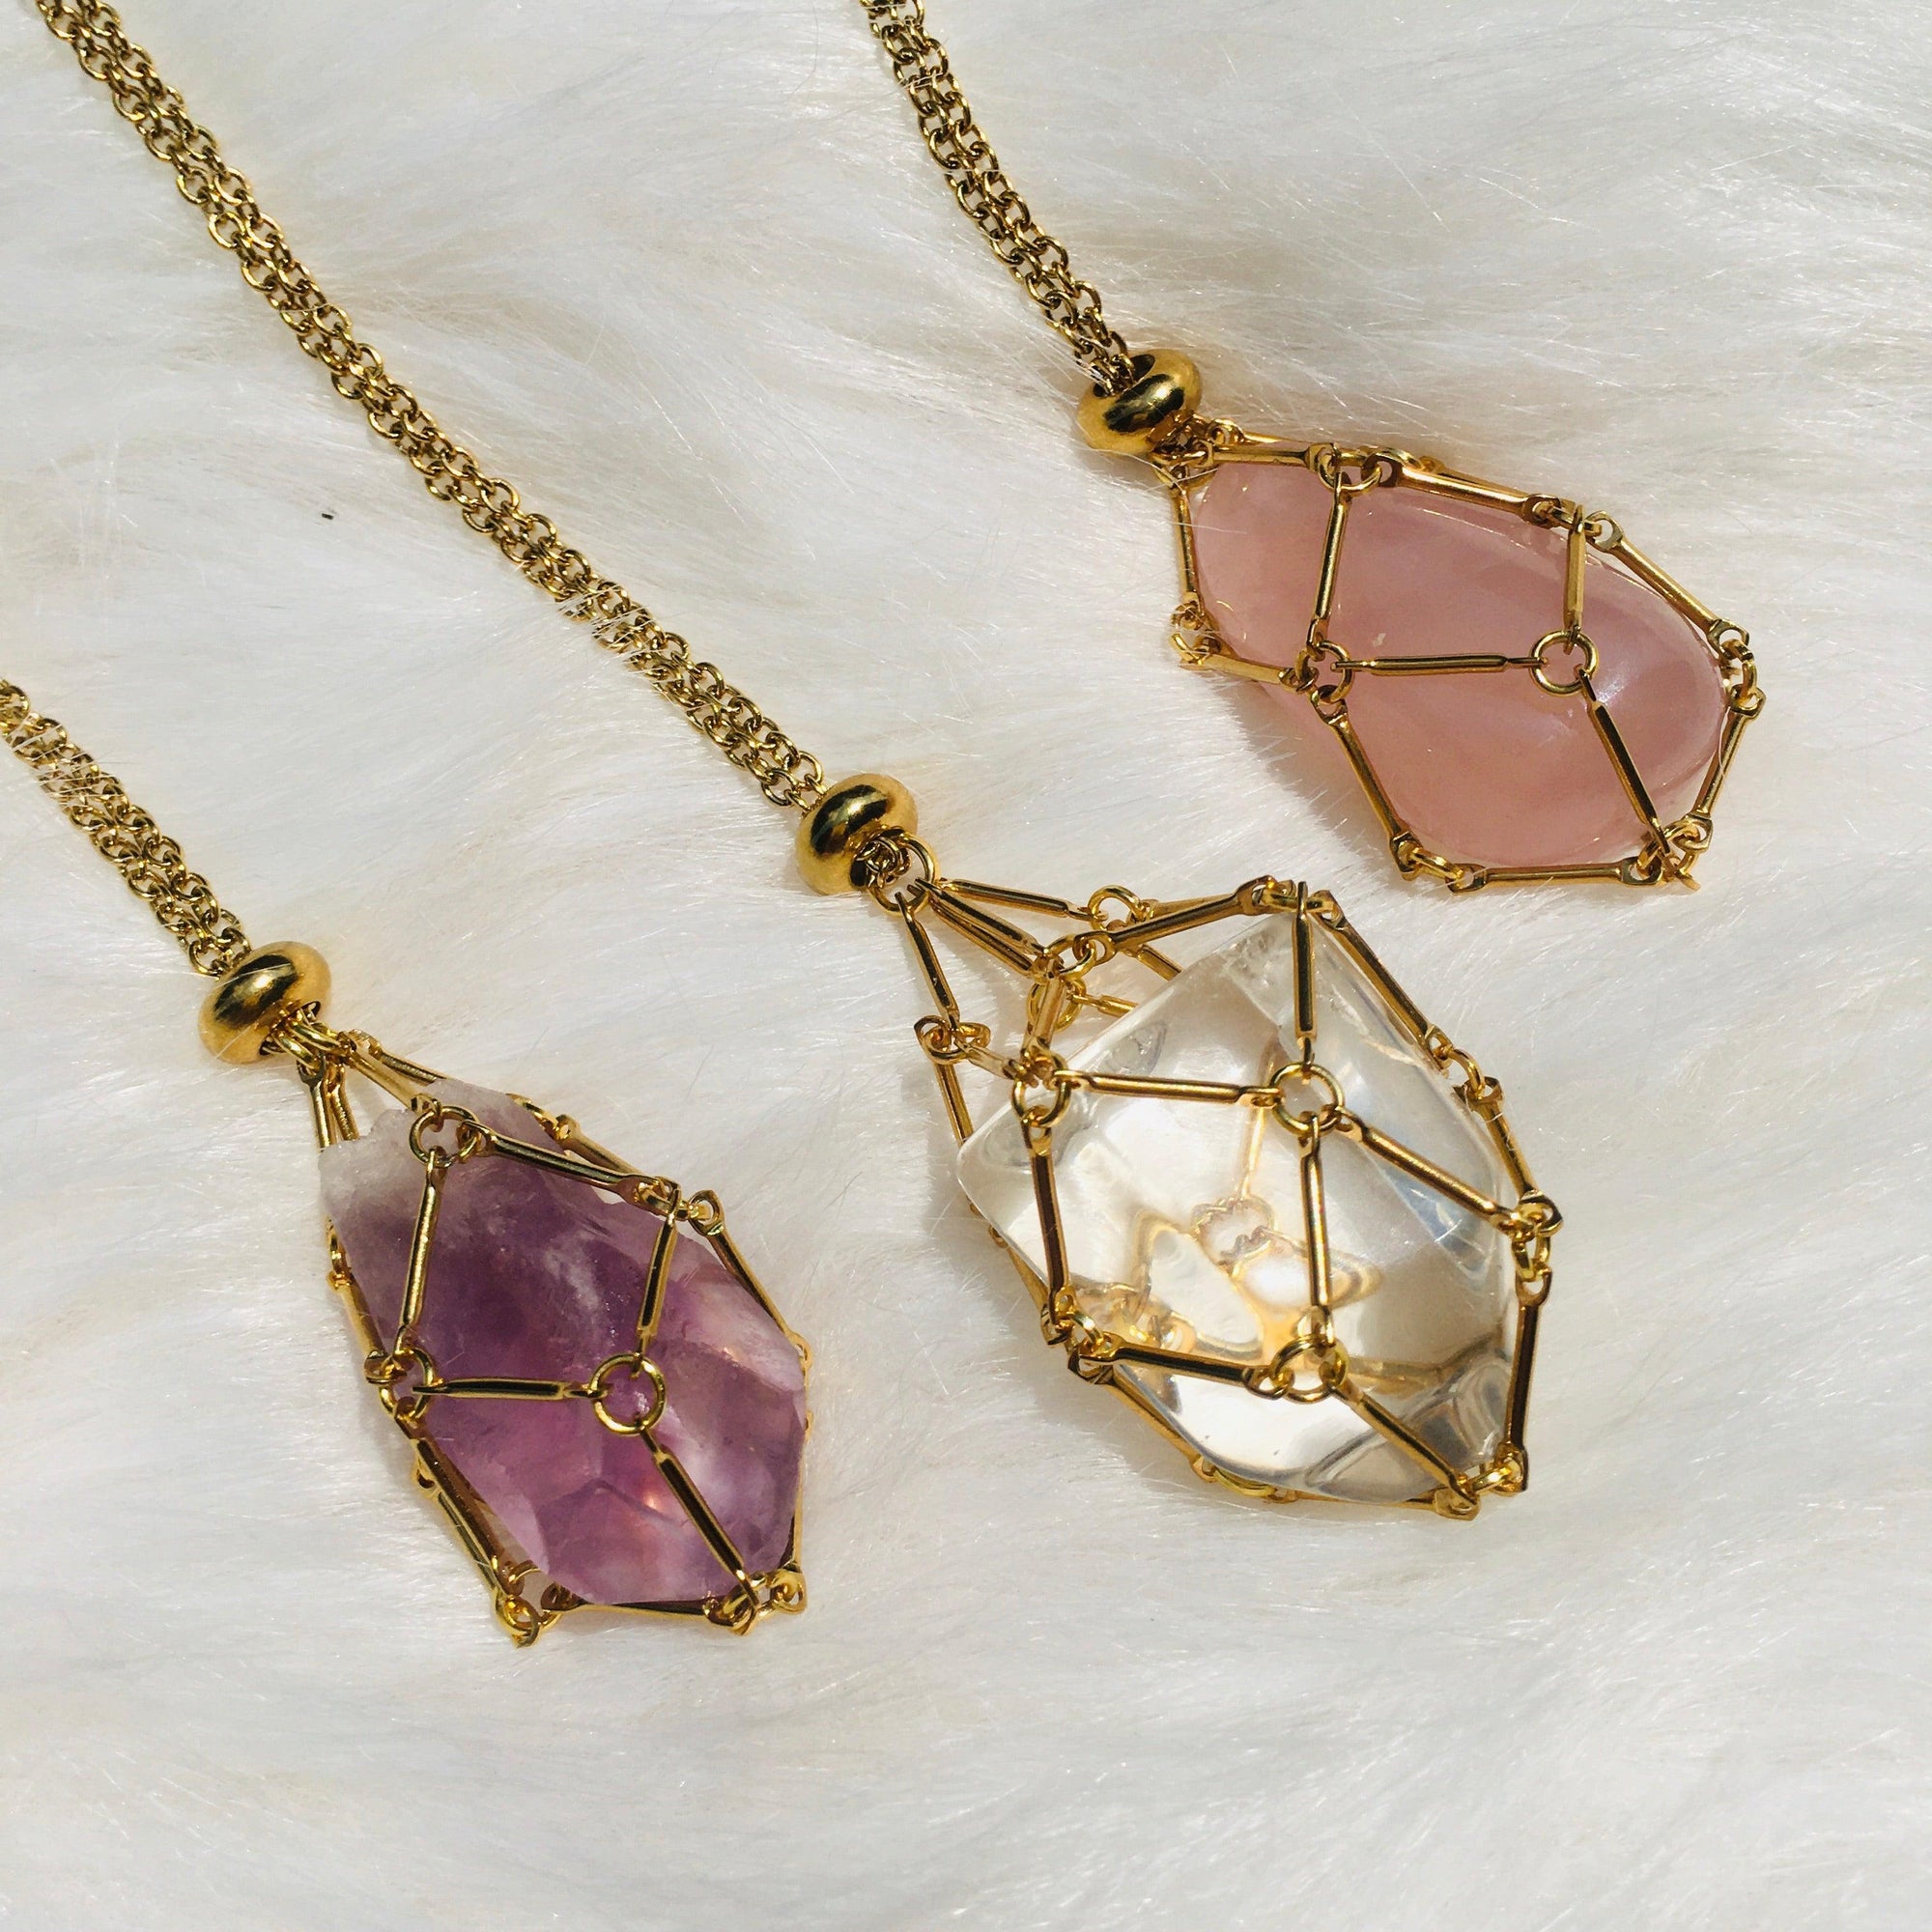 Enhance Your Journey with Zuzumia's Crystal Holder Necklace